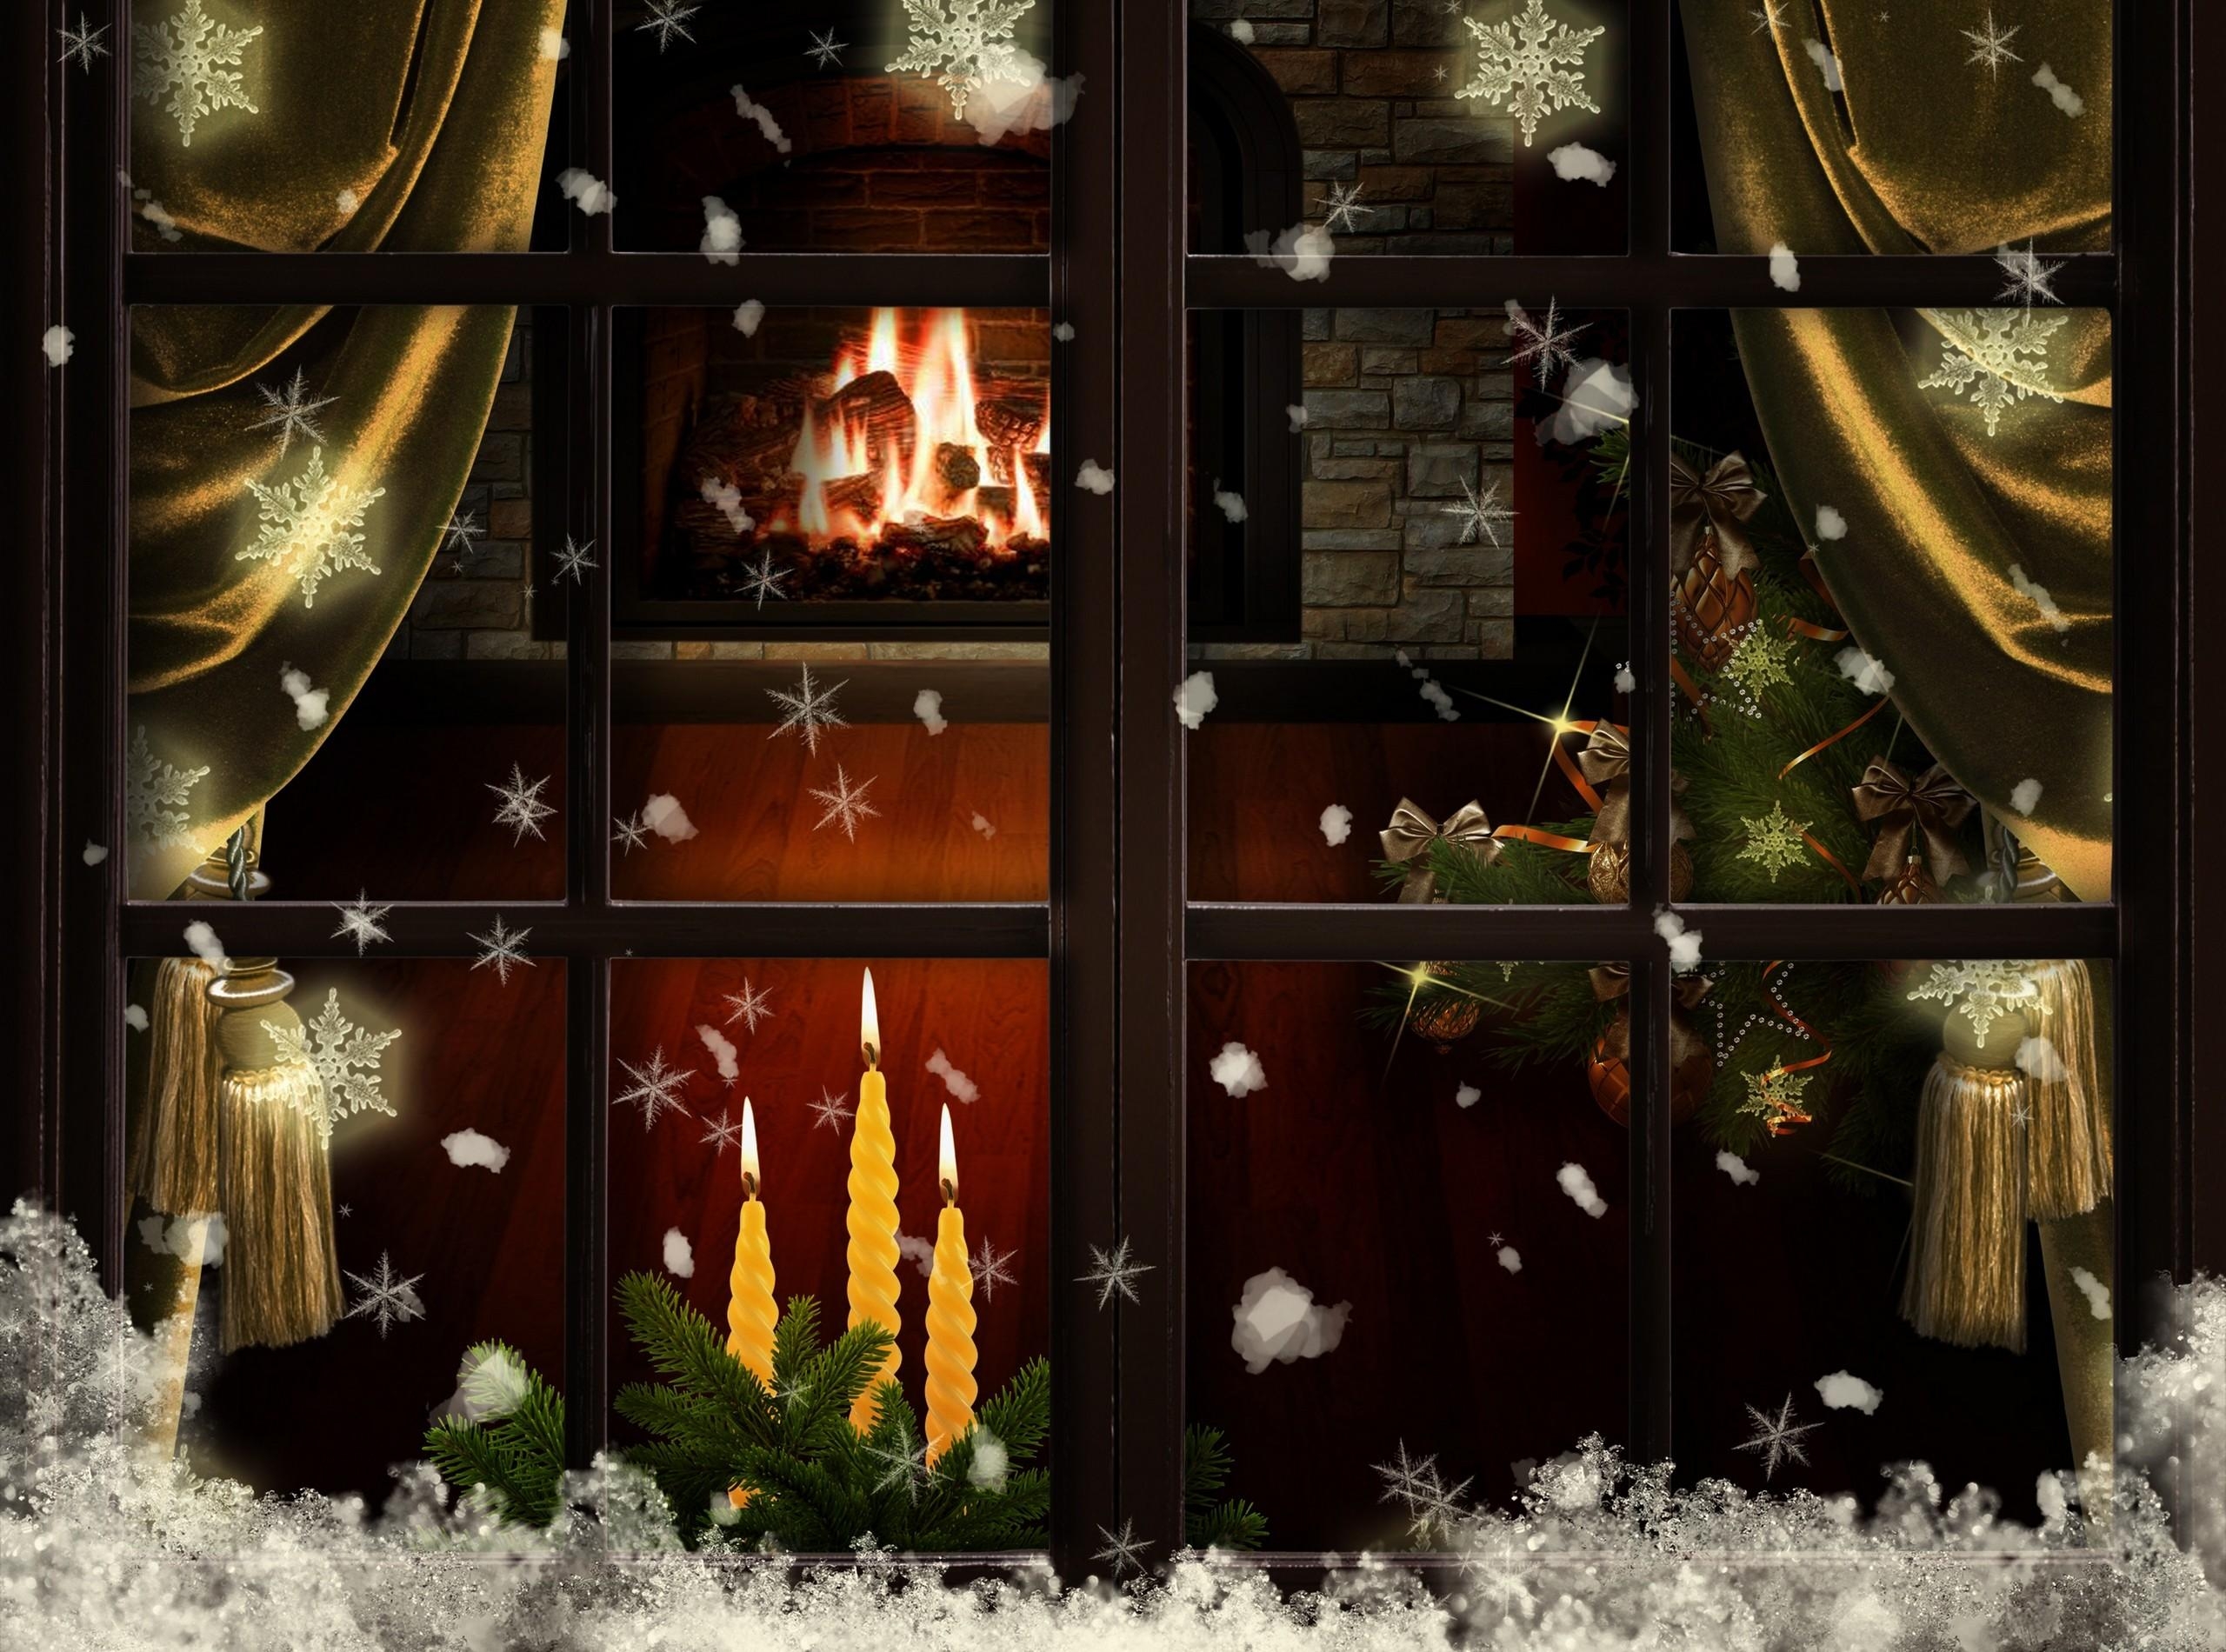 Cosy Christmas 2016: Wallpaper window, fireplace, candles